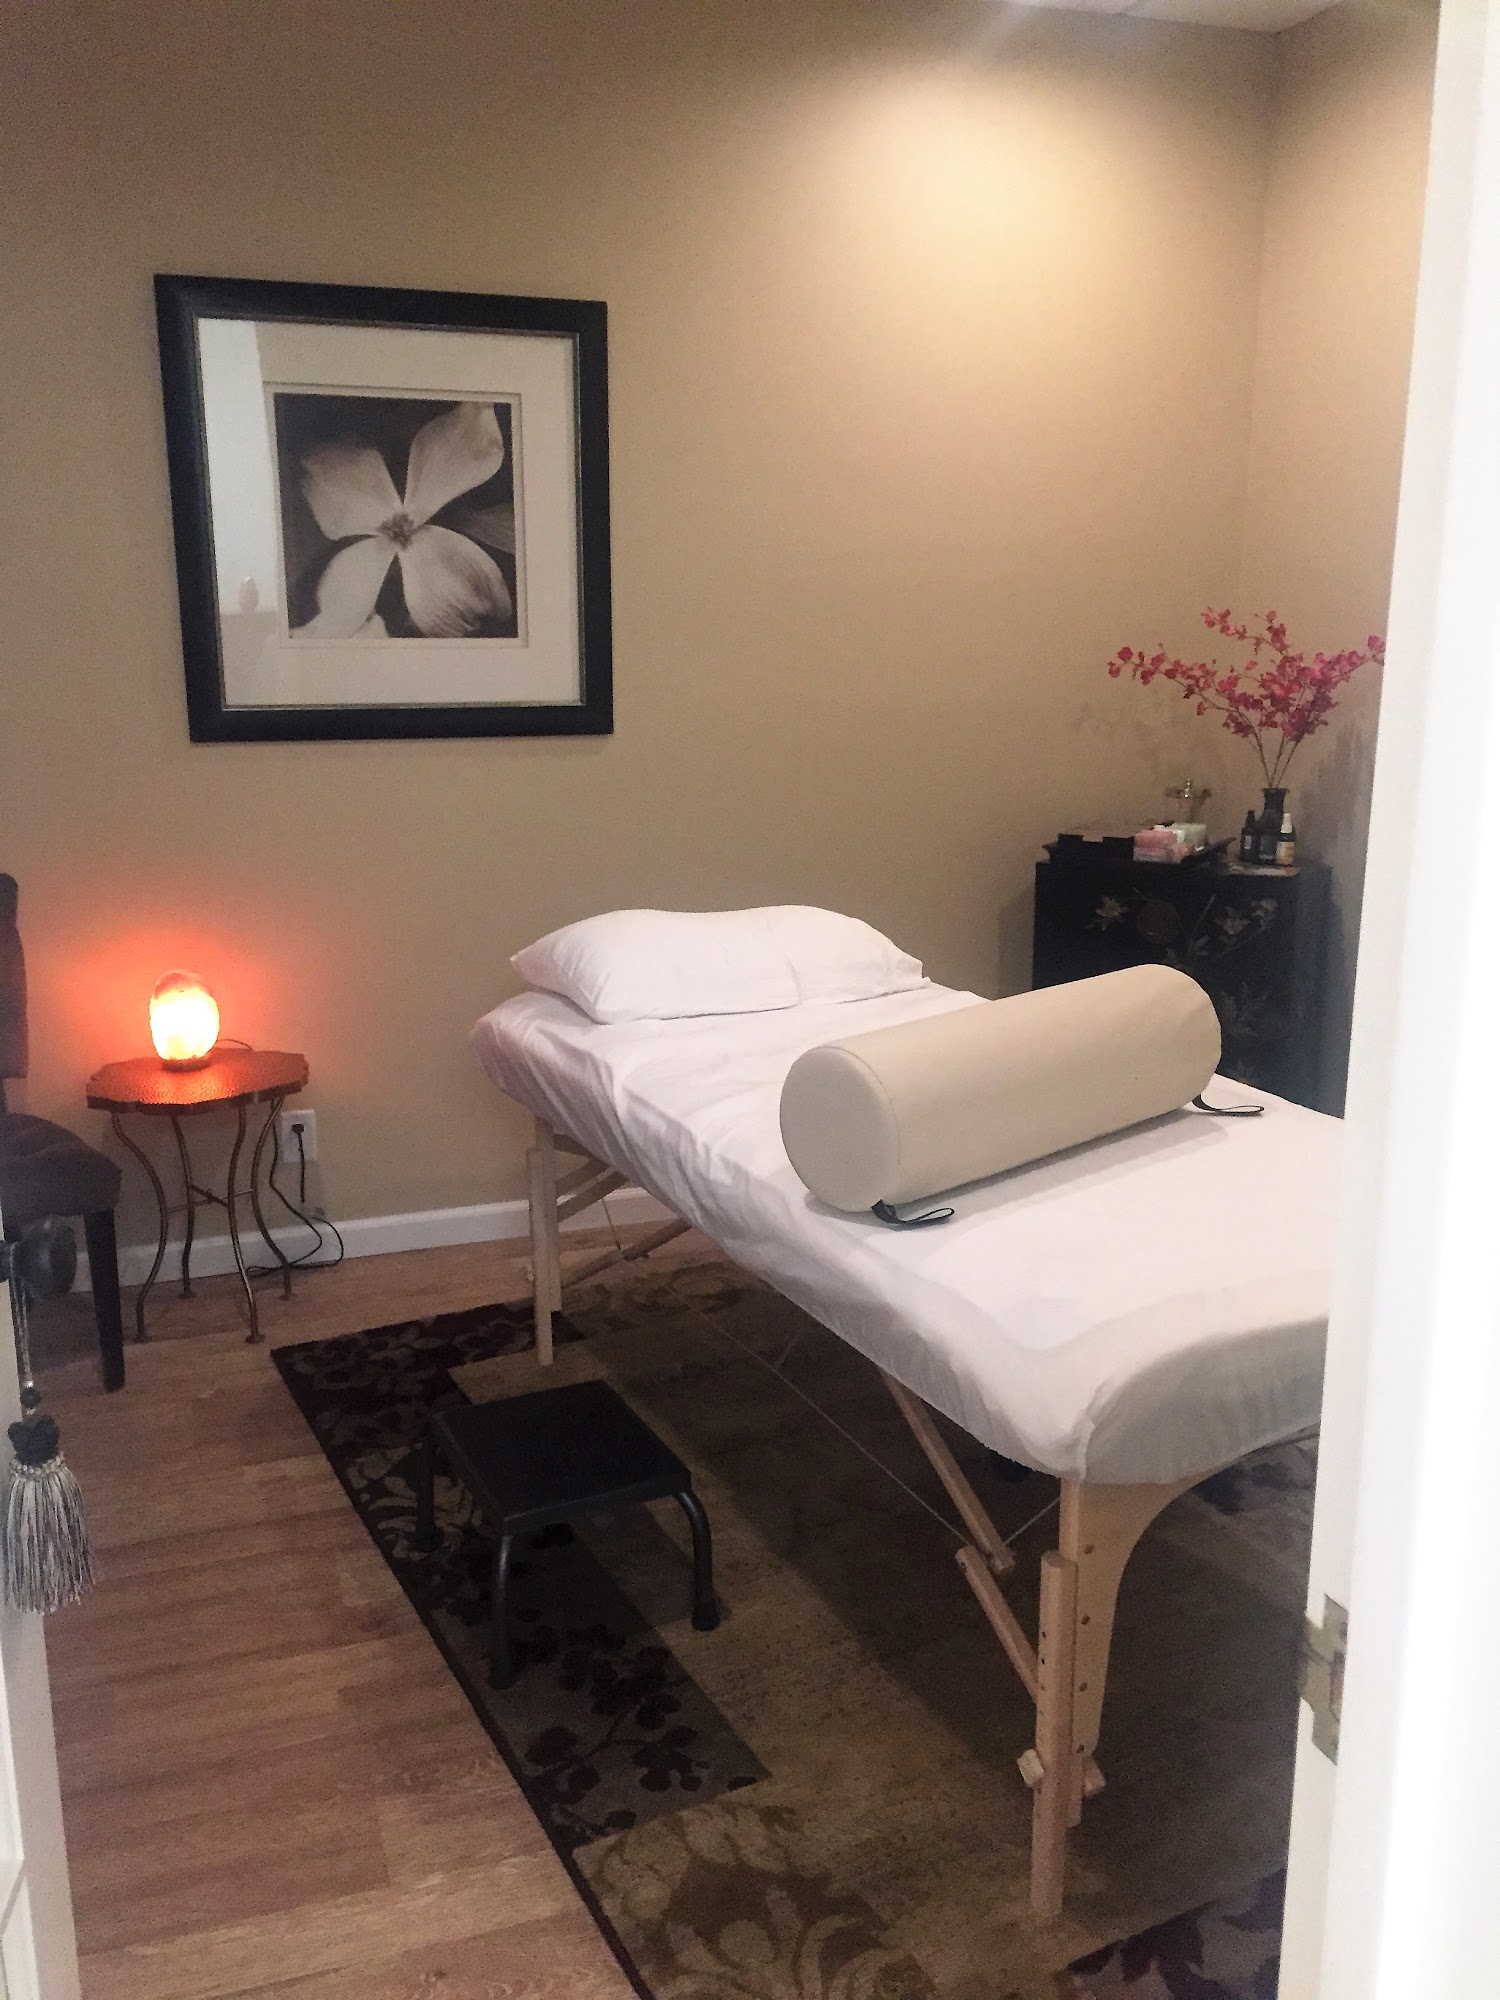 Acupuncture Healing and Wellness Center